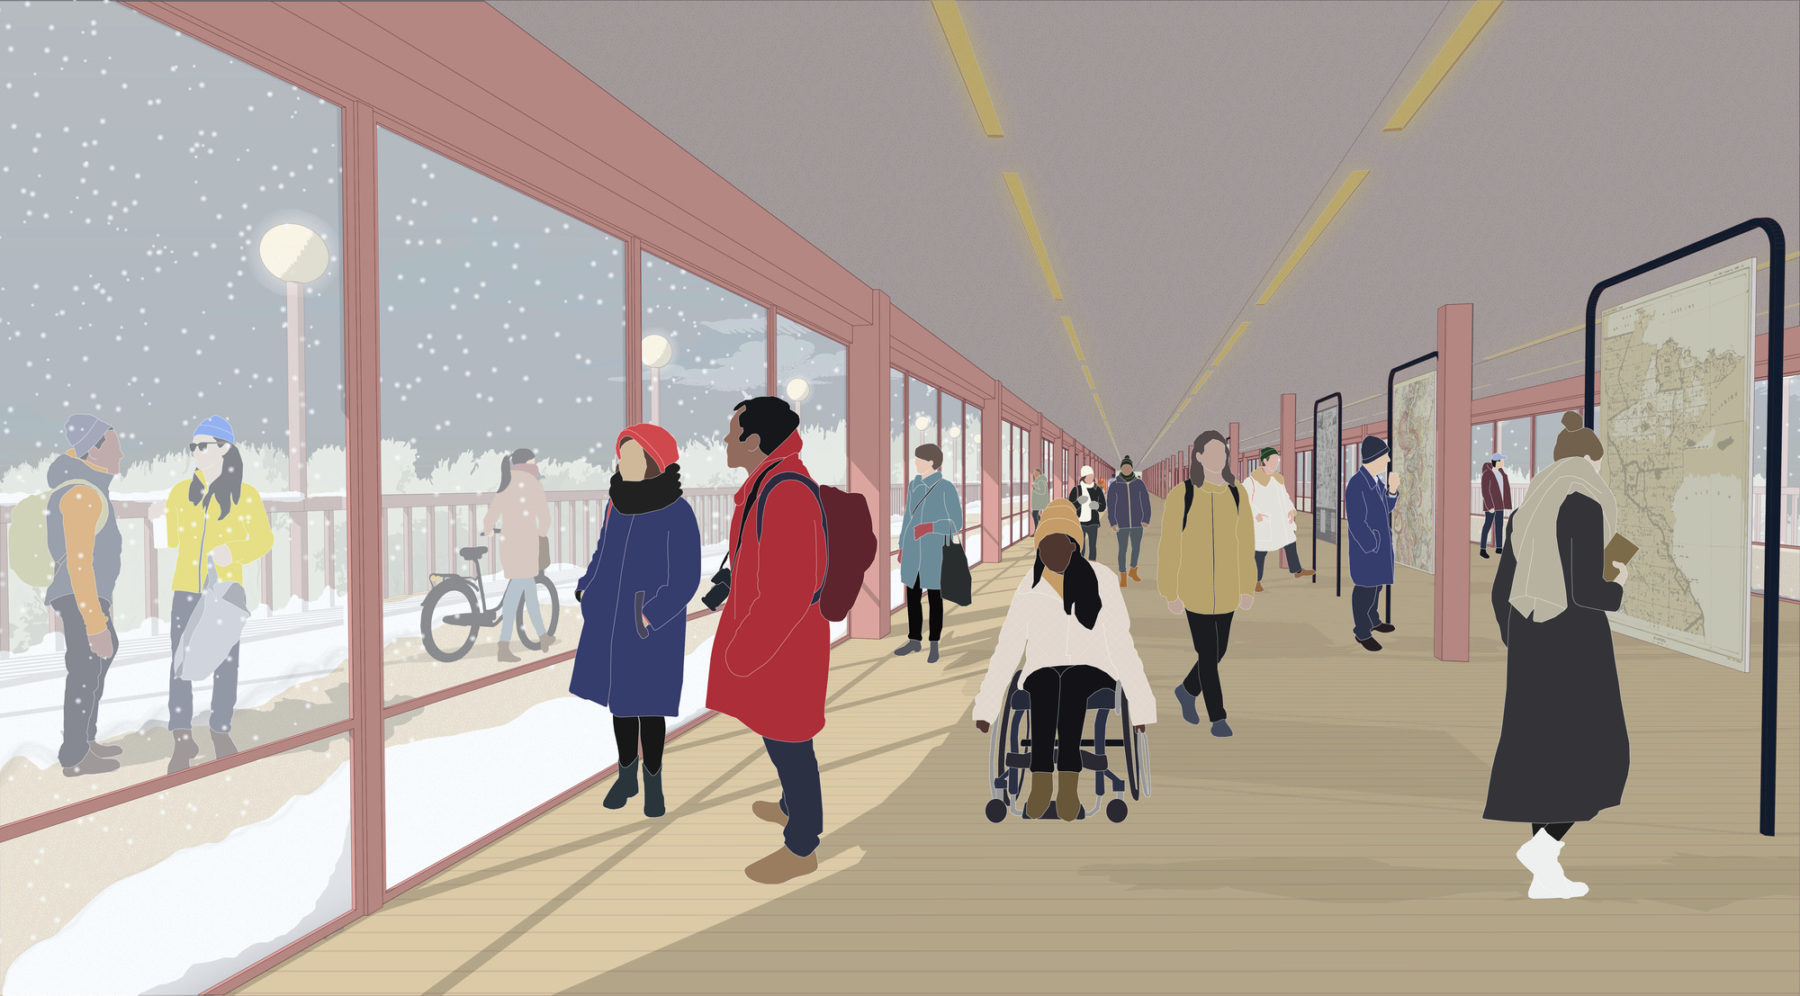 graphic rendering of the interior of the exhibition showing several people walking down a hallway and two people wearing coats looking out a window at a snowy sidewalk